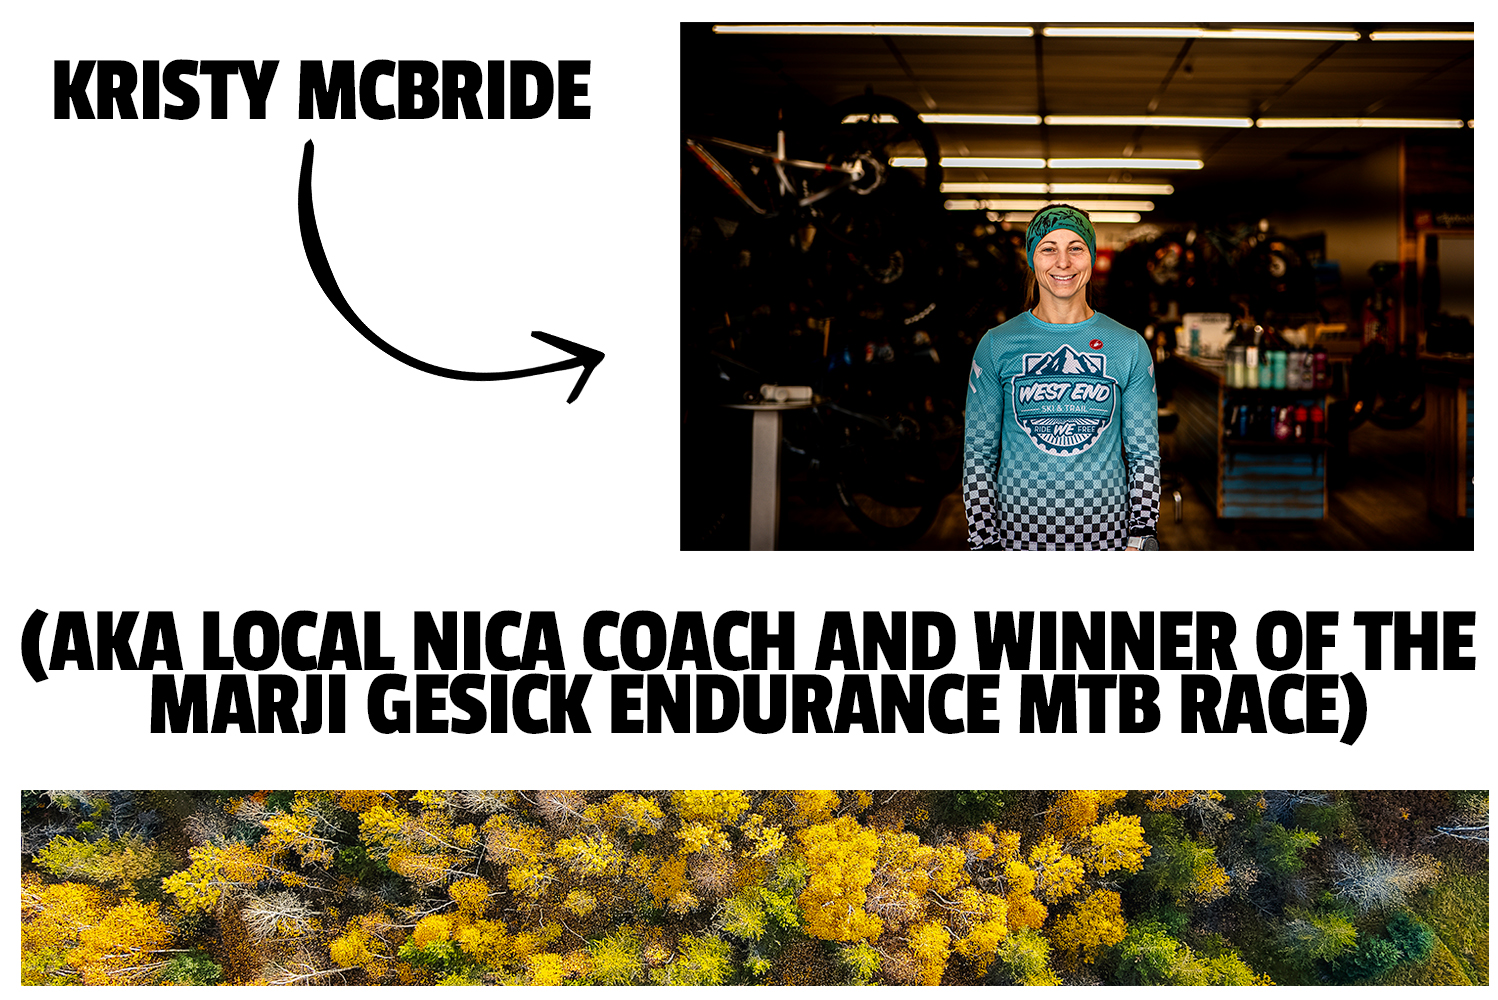 "One portrait of Kristy McBride with her name and an arrow pointing toward him and a second photo of an aerial of Autumn trees. Additional text also says 'Aka course record holder of the Marji Gessick endurance mountain bike race. .""